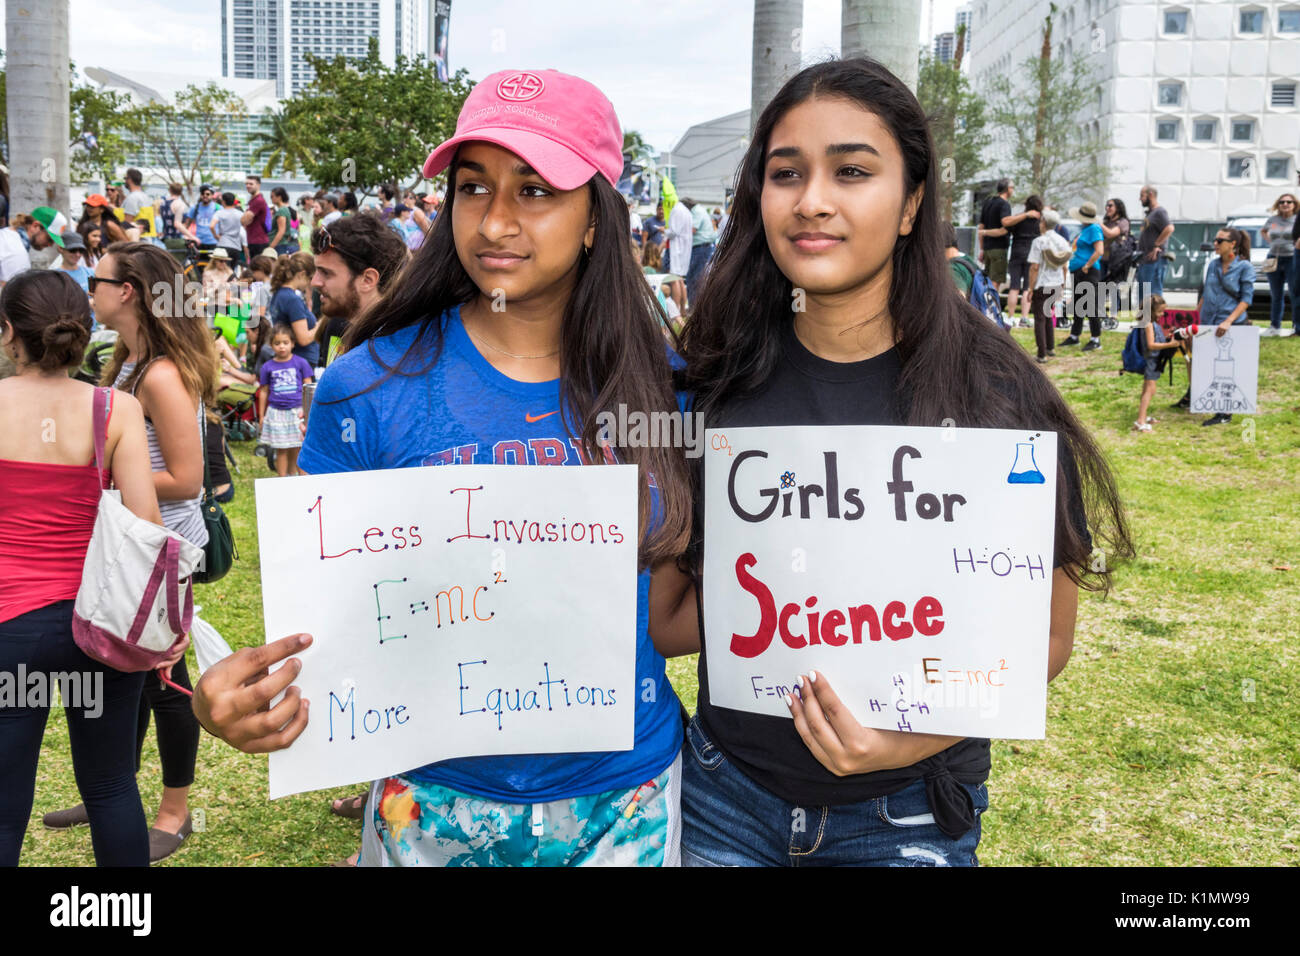 Miami Florida,Museum Park,March for Science,protest,rally,sign,protester,poster,student students pupil Asian teen teens teenager teenagers girl girls, Stock Photo